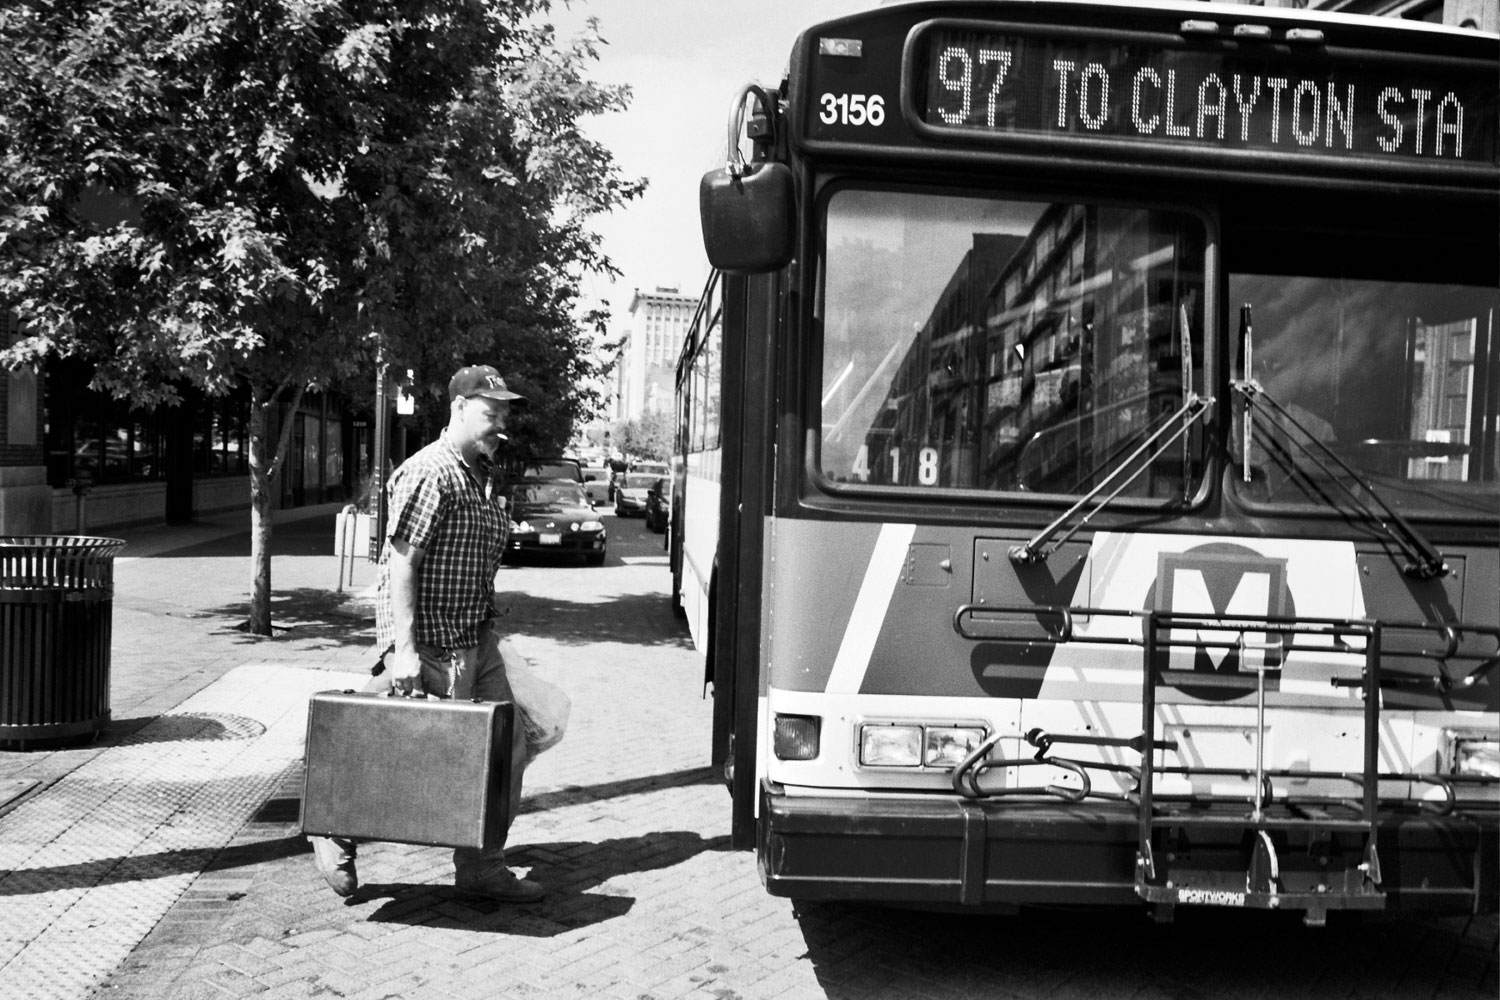 A passenger steps on to a bus heading for Clayton Station in St. Louis, Mo.